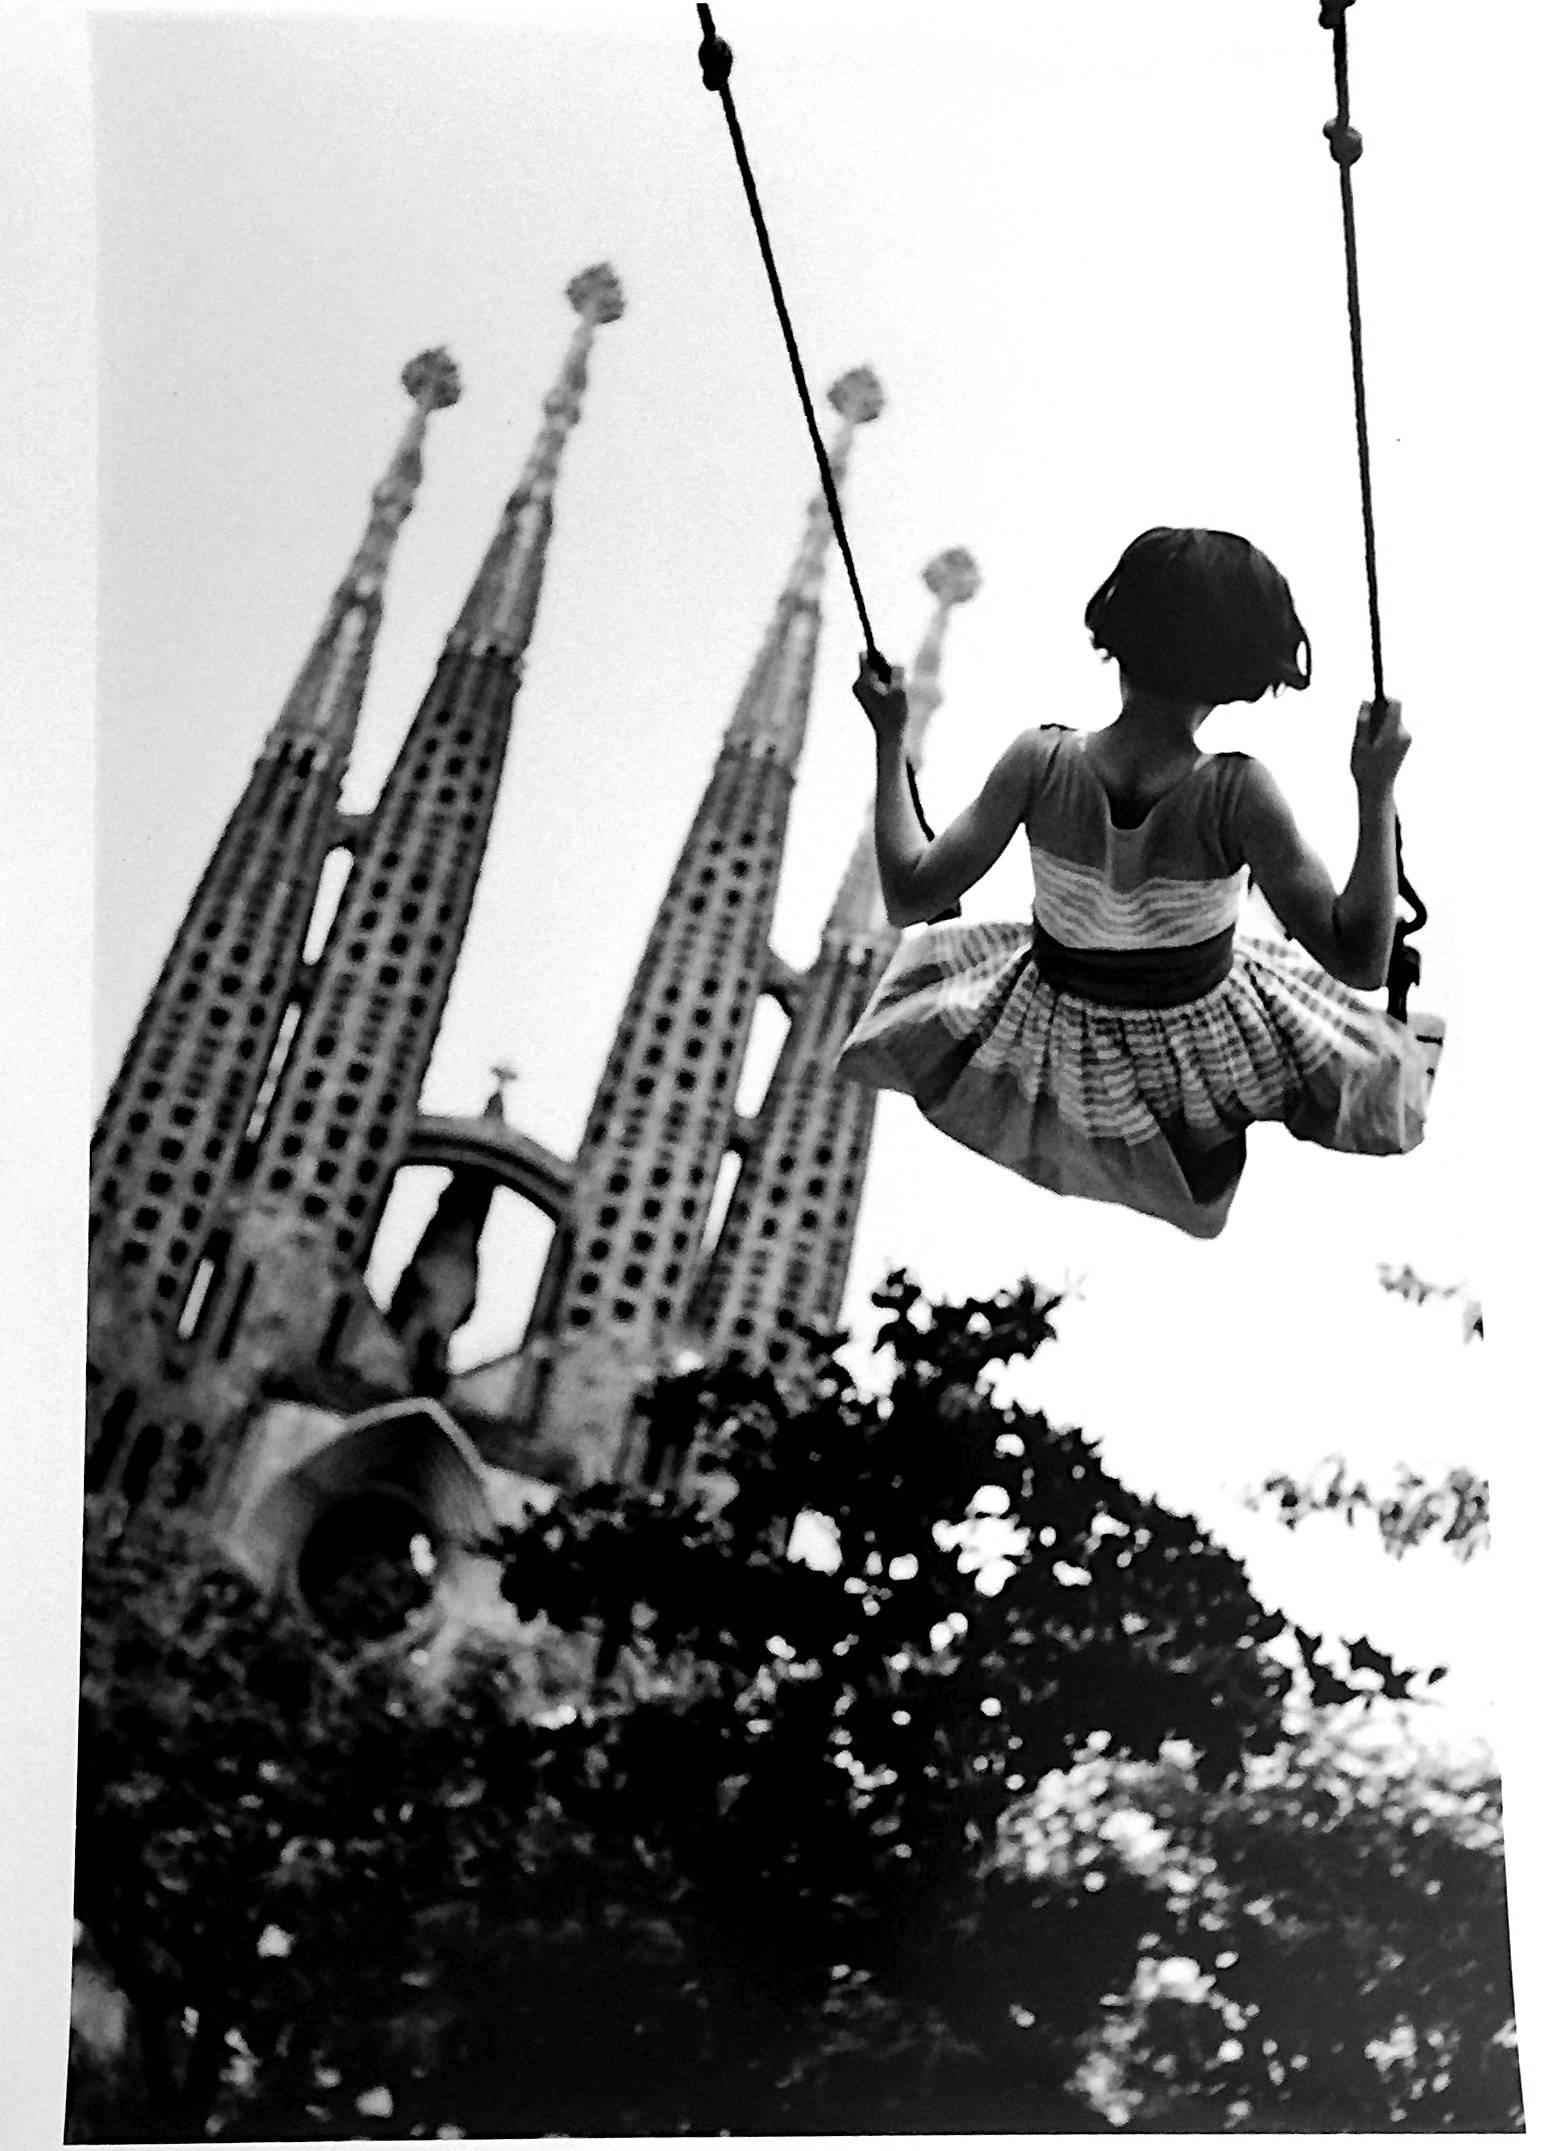 Burt Glinn's The Sagrada Familia, Barcelona, Swing, 1959, is a gelatin silver print, 20 x 16, signed and stamped (authenticated) by the estate. Here, a young girl swings carefree against the backdrop of the architect Antoni Gaudi's magnificent and